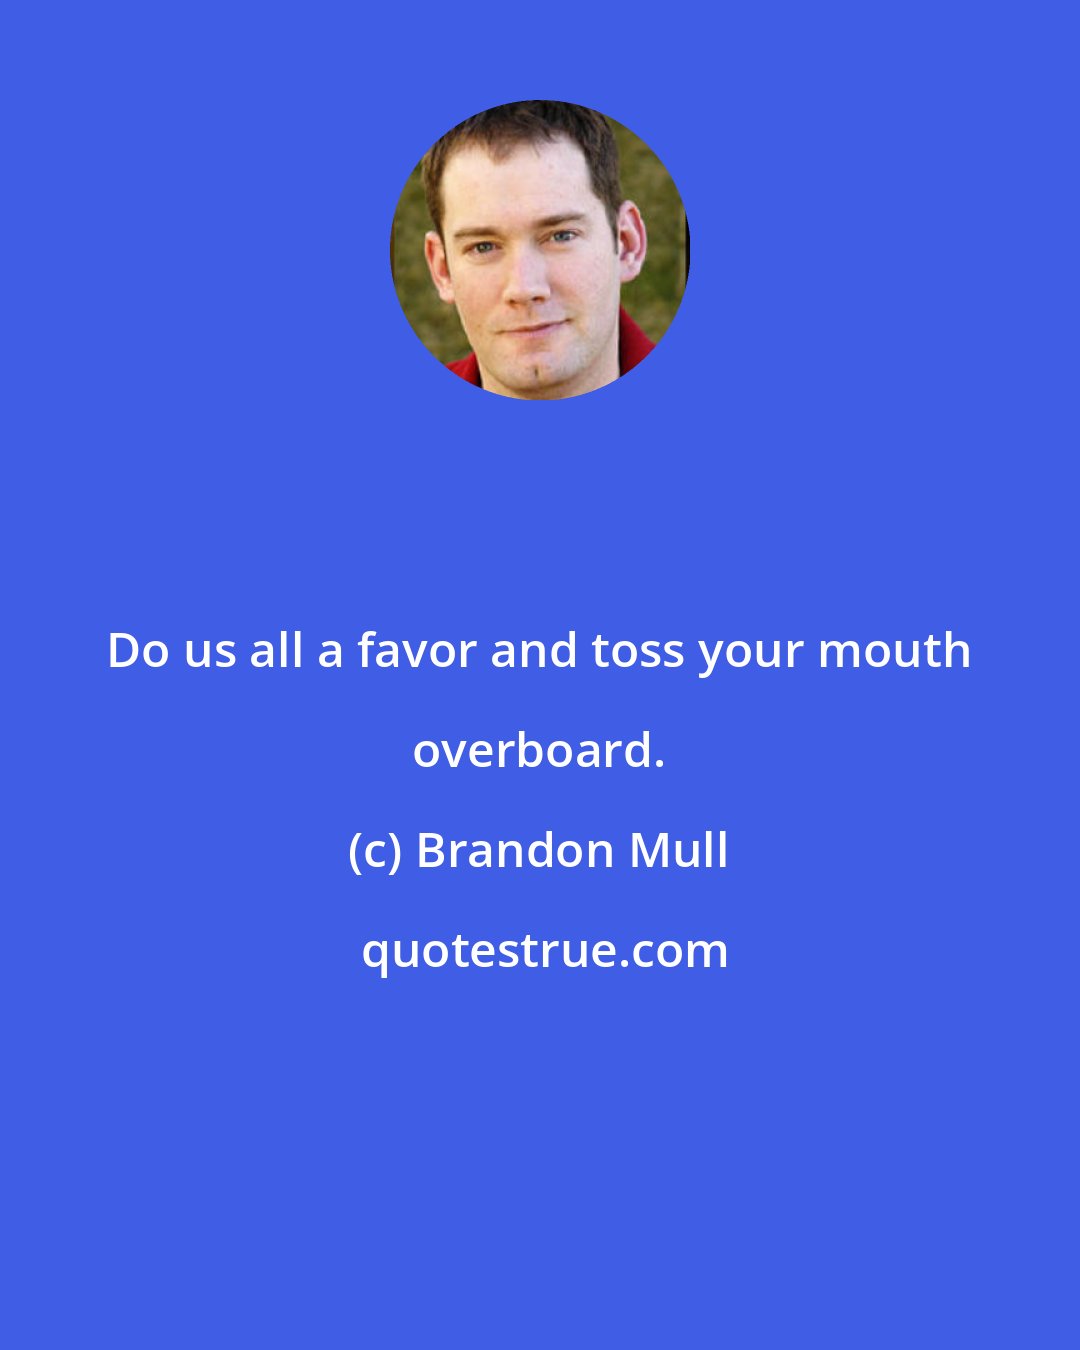 Brandon Mull: Do us all a favor and toss your mouth overboard.